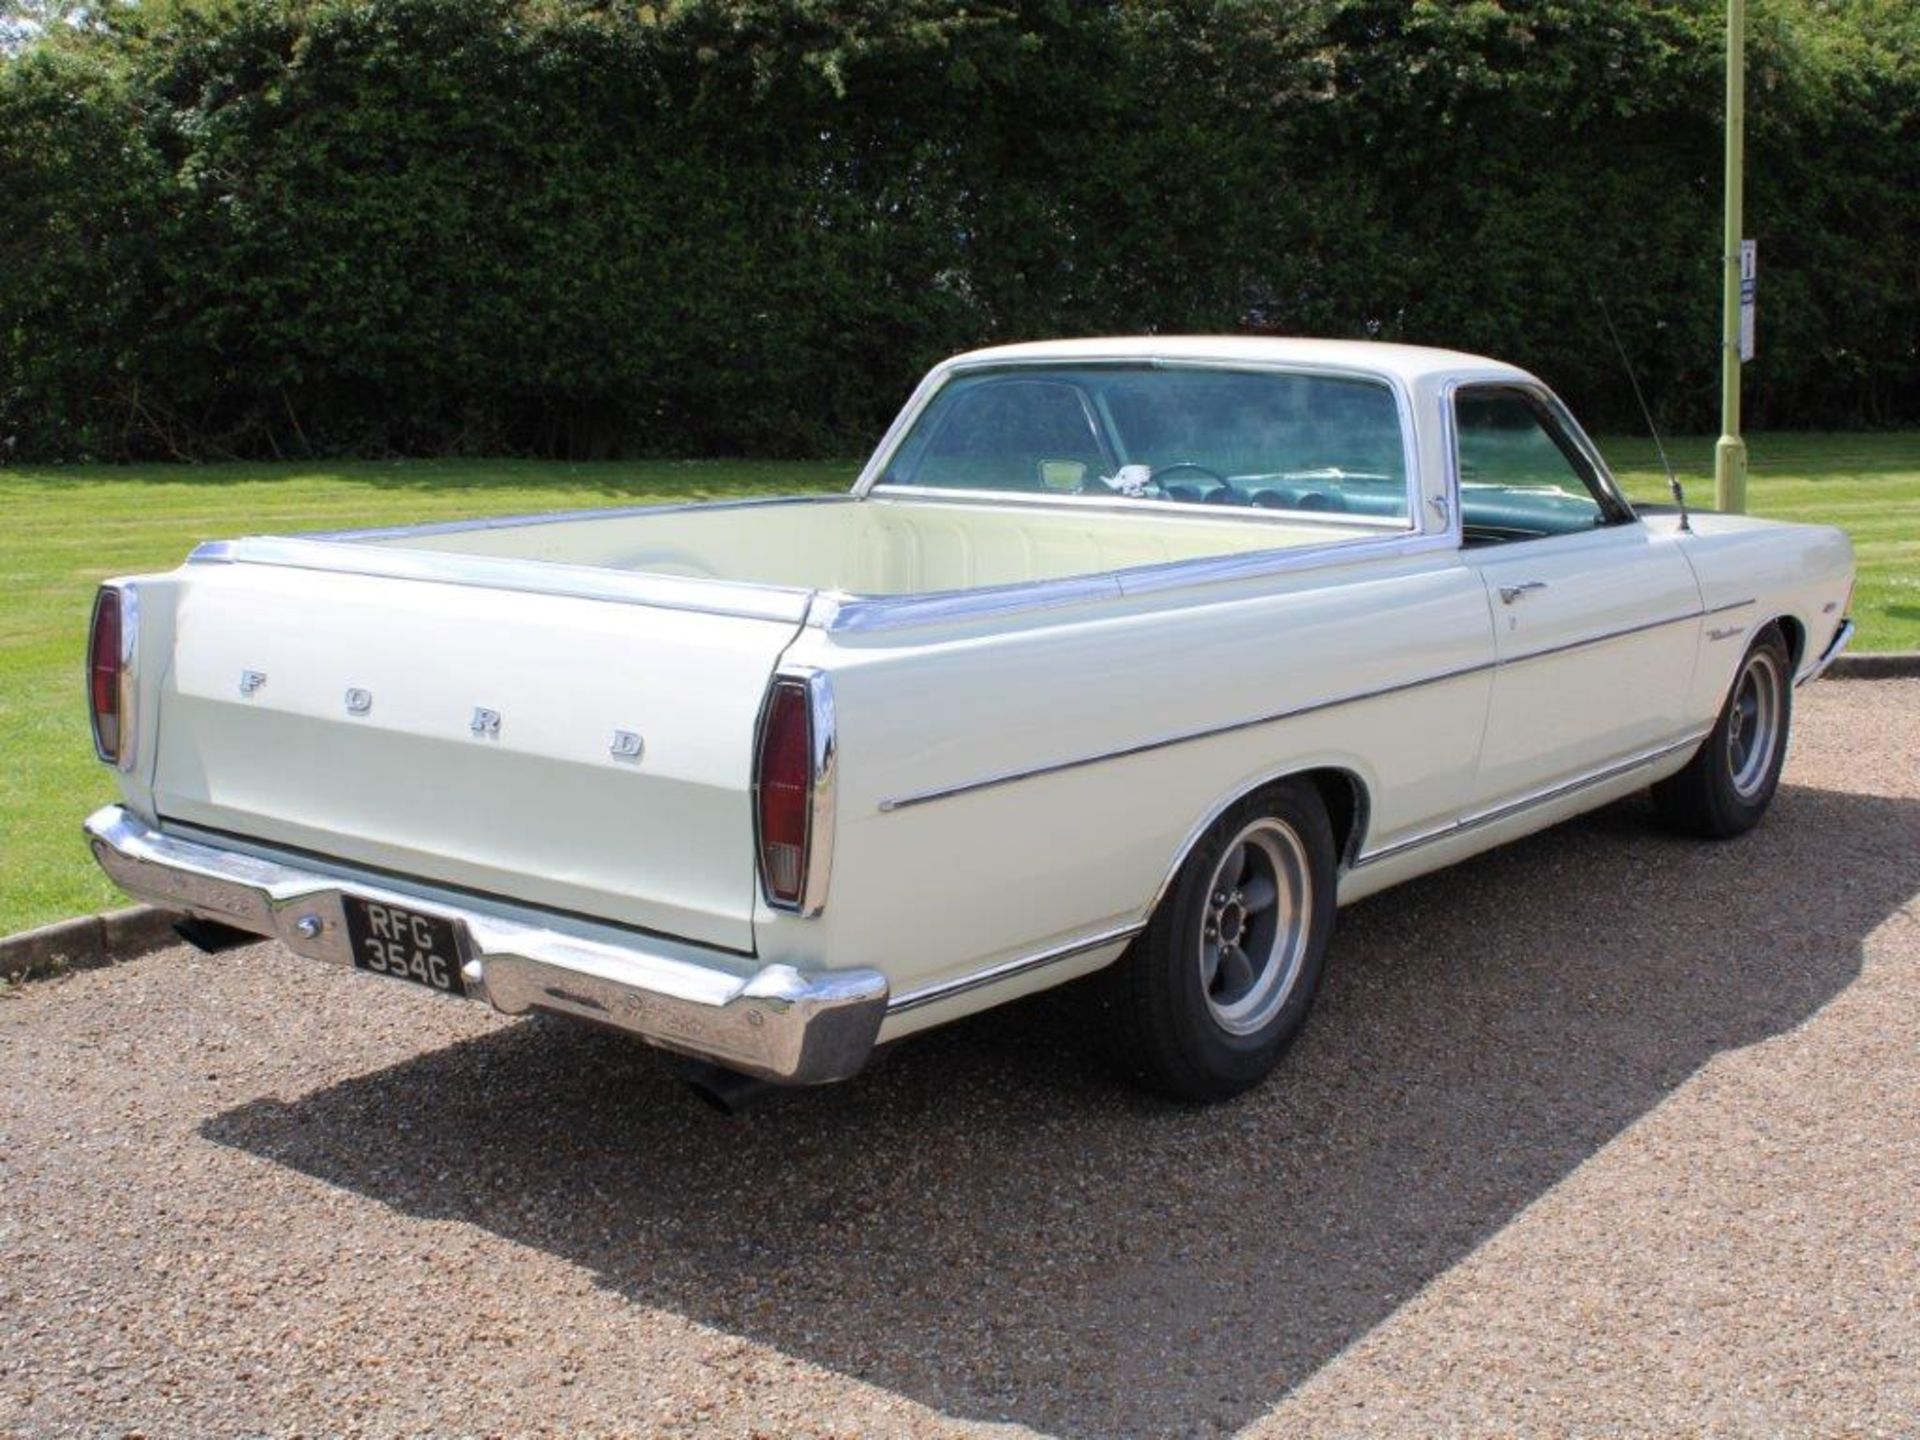 1969 Ford Ranchero 5.8 V8 Auto LHD - Image 8 of 25